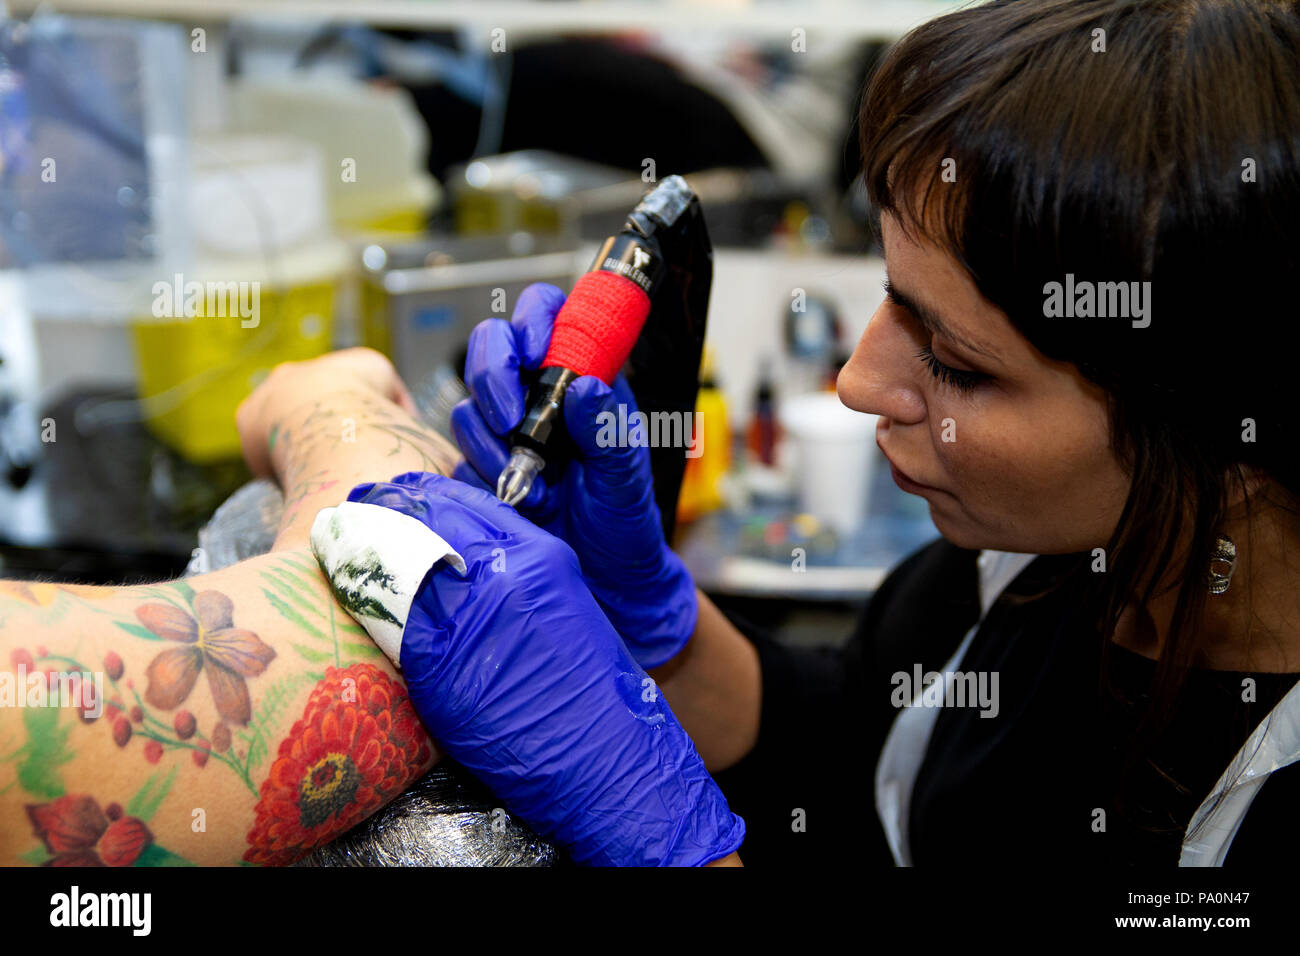 Tattoo Shops in LA County Are Still Shuttered but Artists Have to Get By